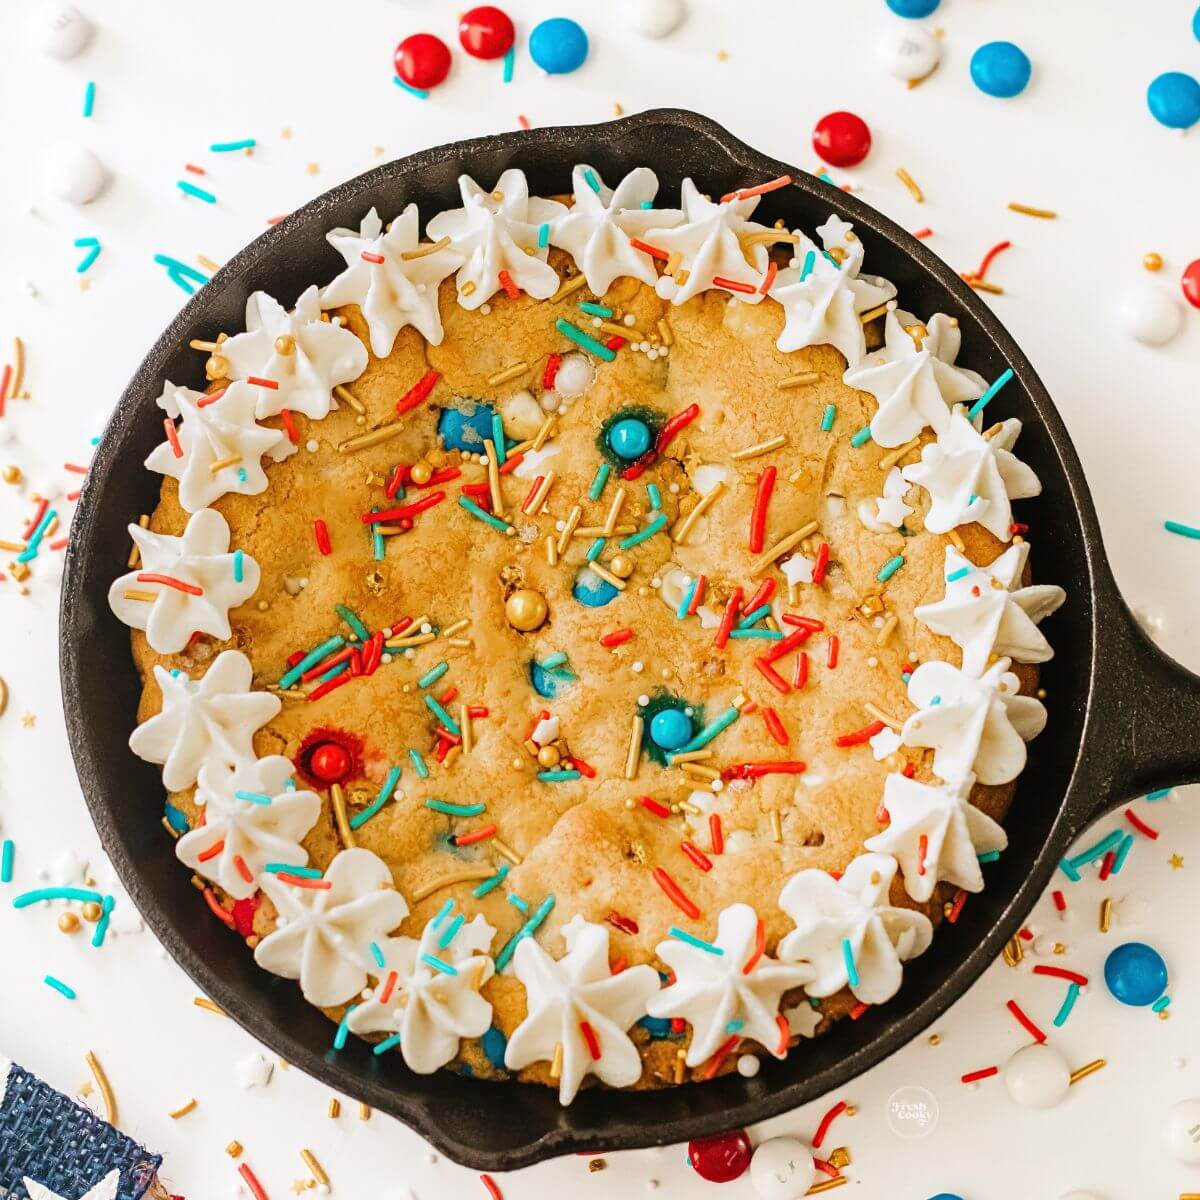 4th of July red, white and blue skillet cookie cake.